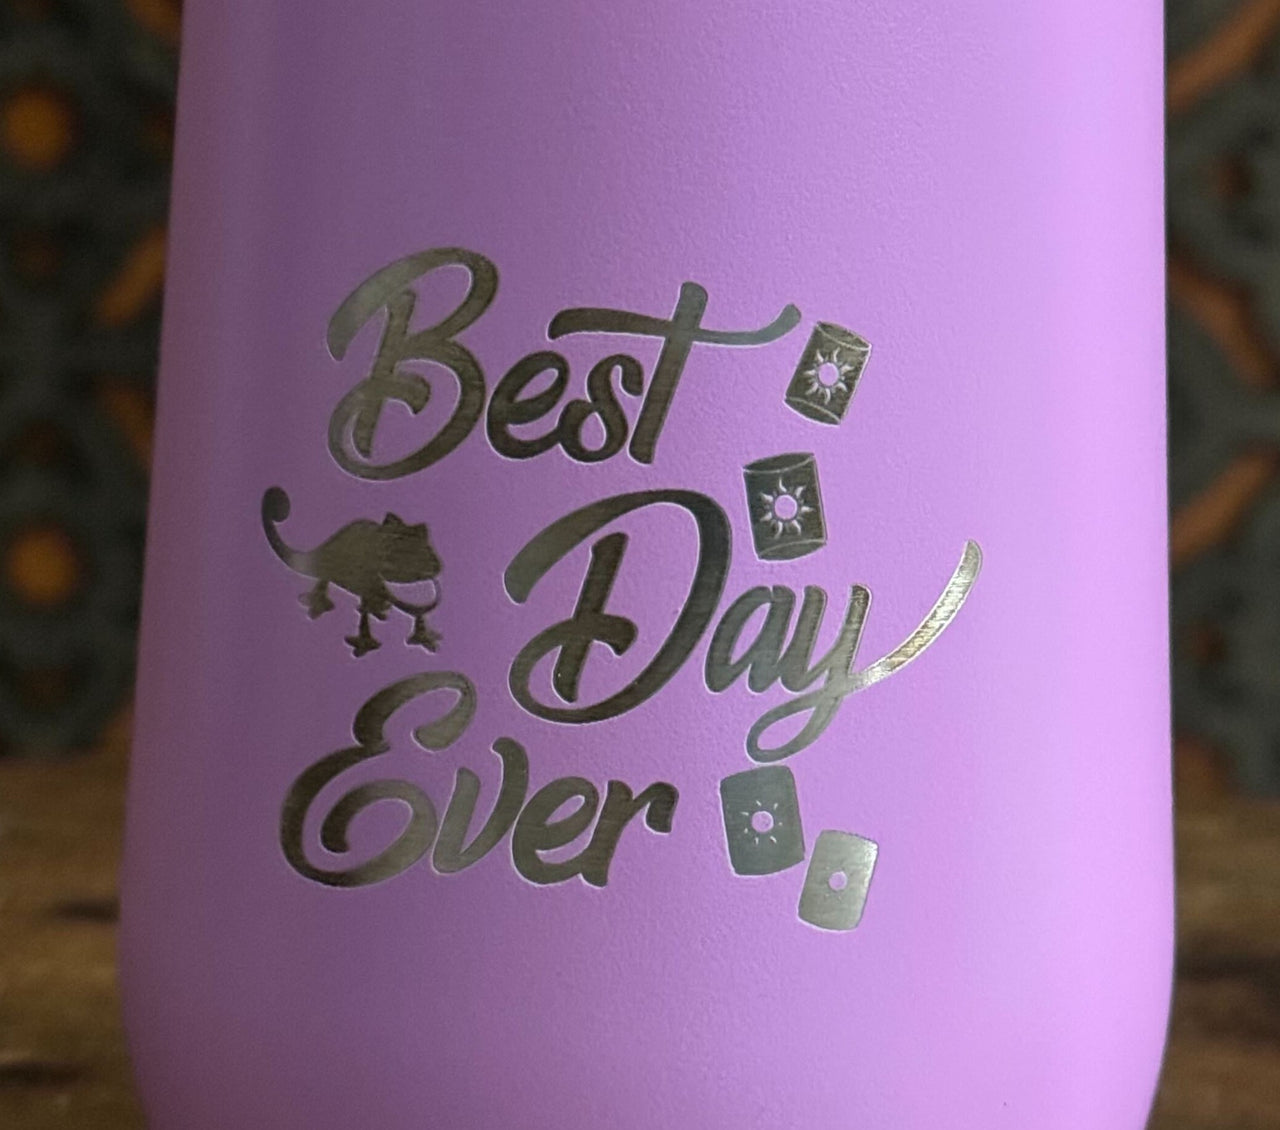 Stemless Engraved Best Day Ever Wine Tumbler